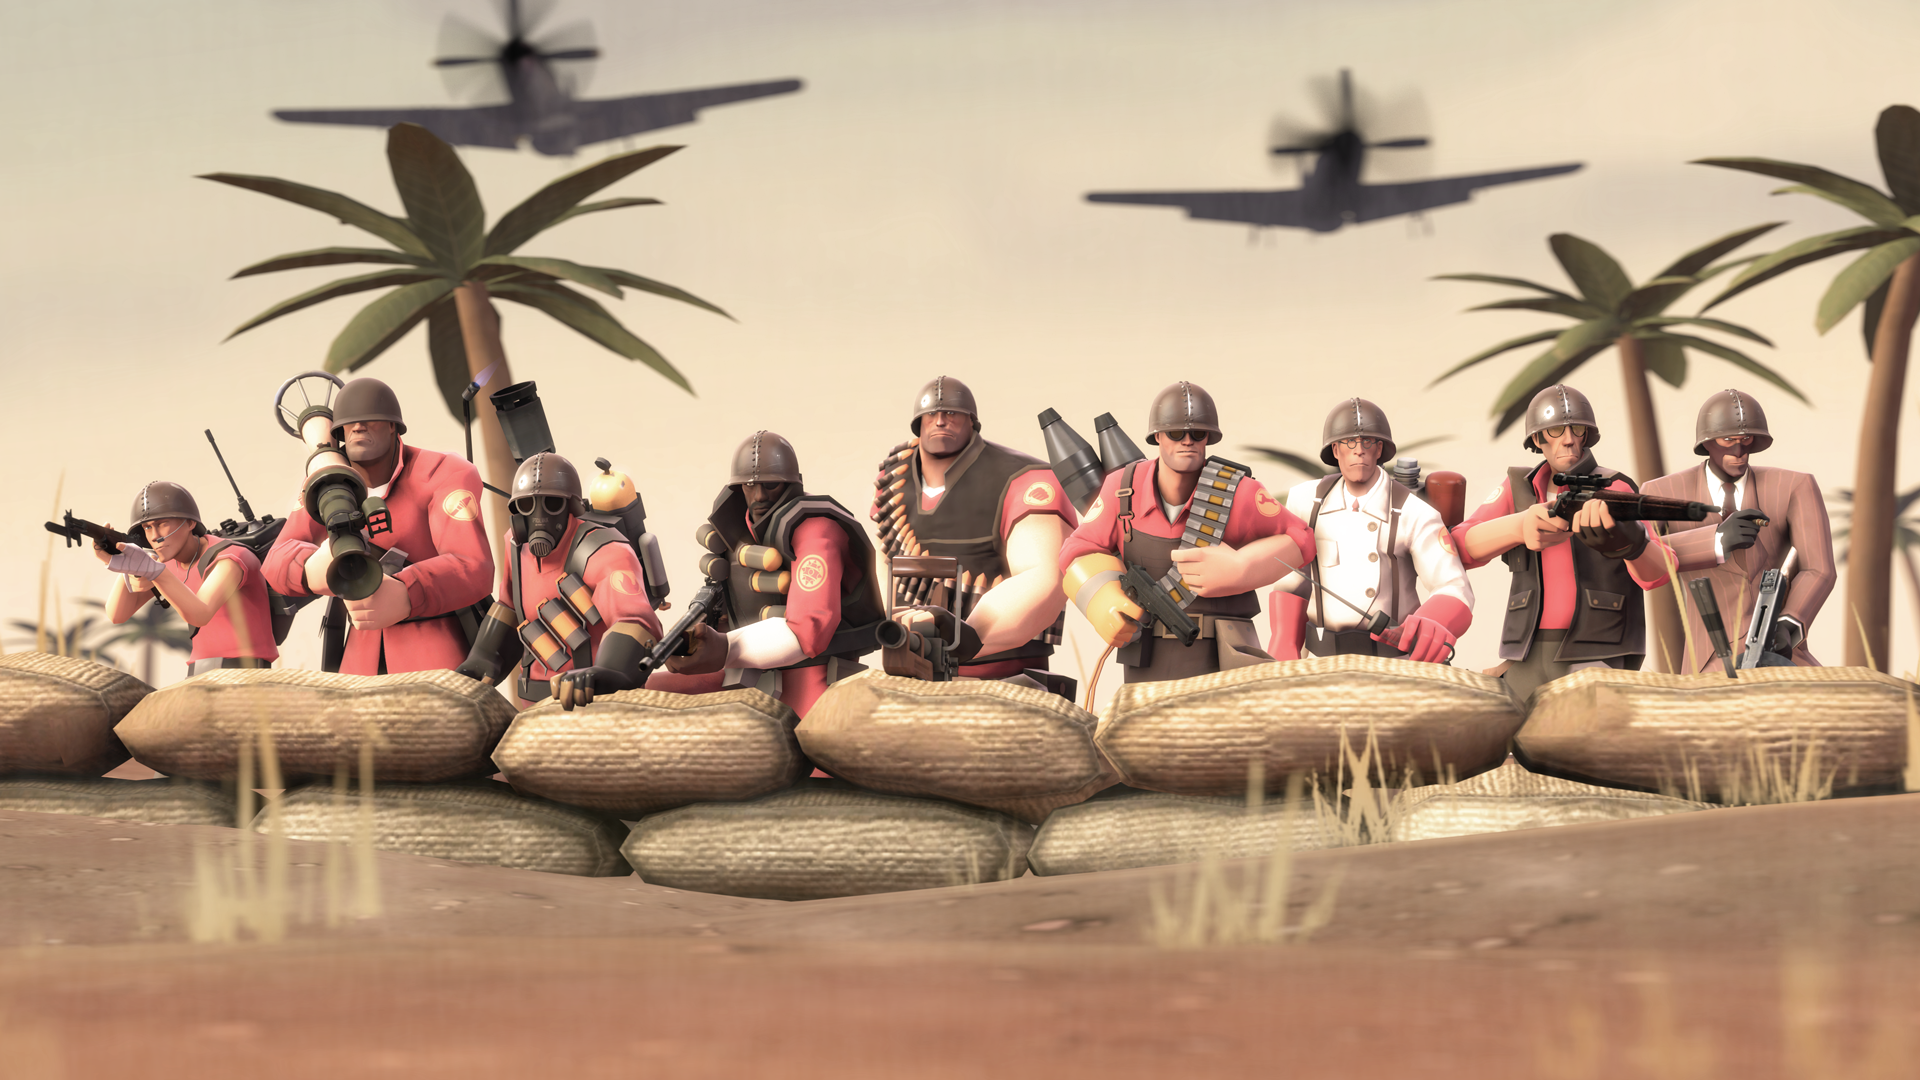 19 Cool Team Fortress 2 Wallpapers - BC-GB